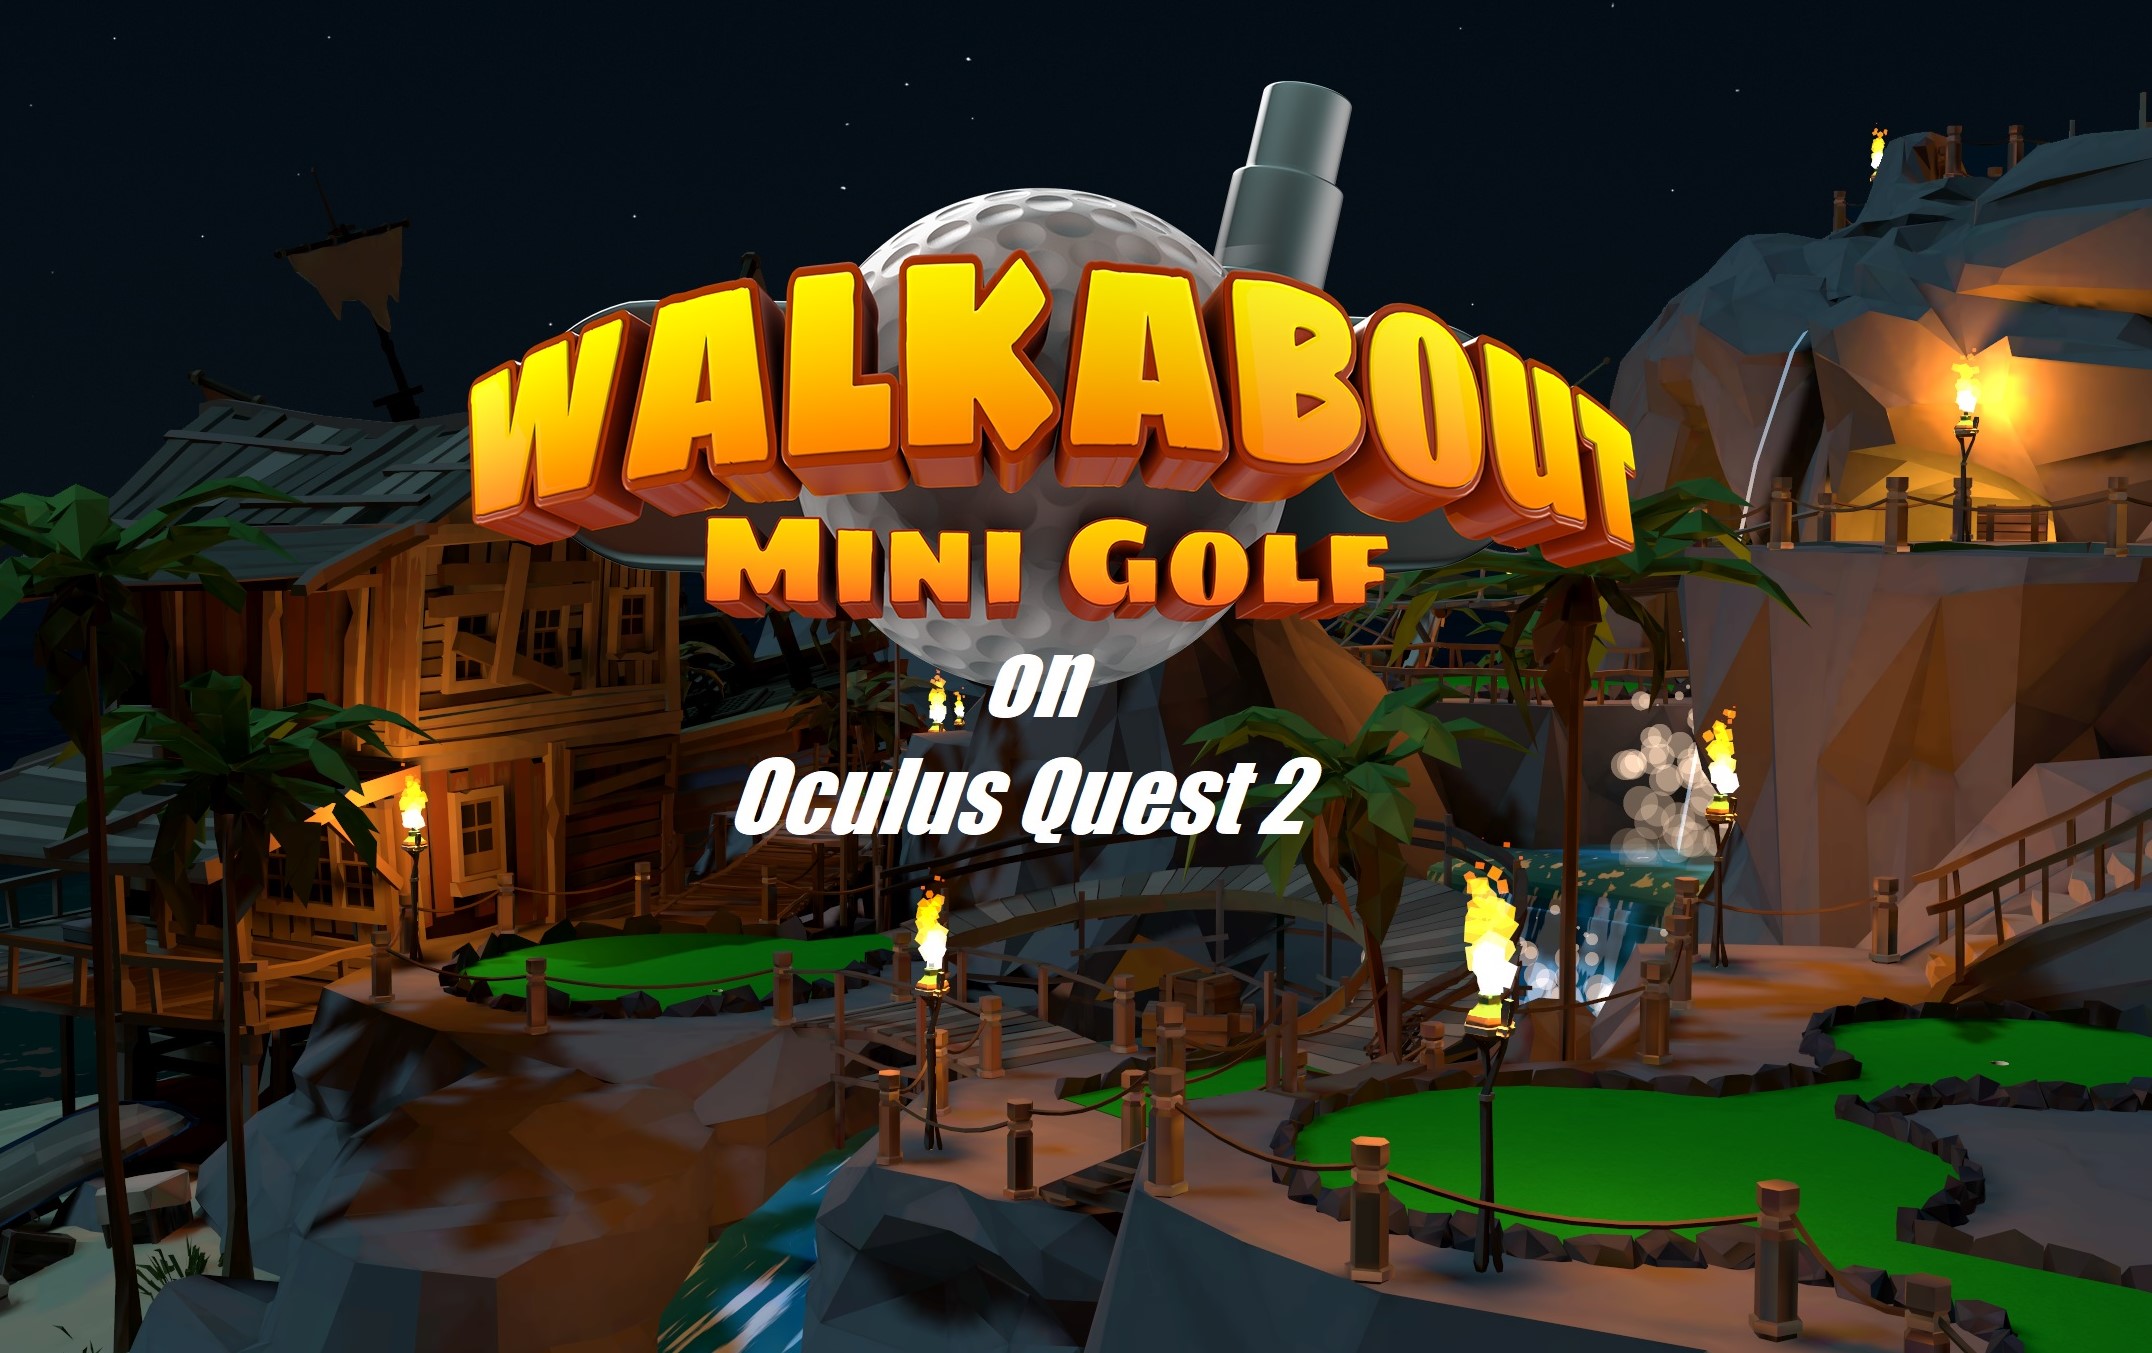 Play The Walkabout Mini Golf on Oculus Quest 2